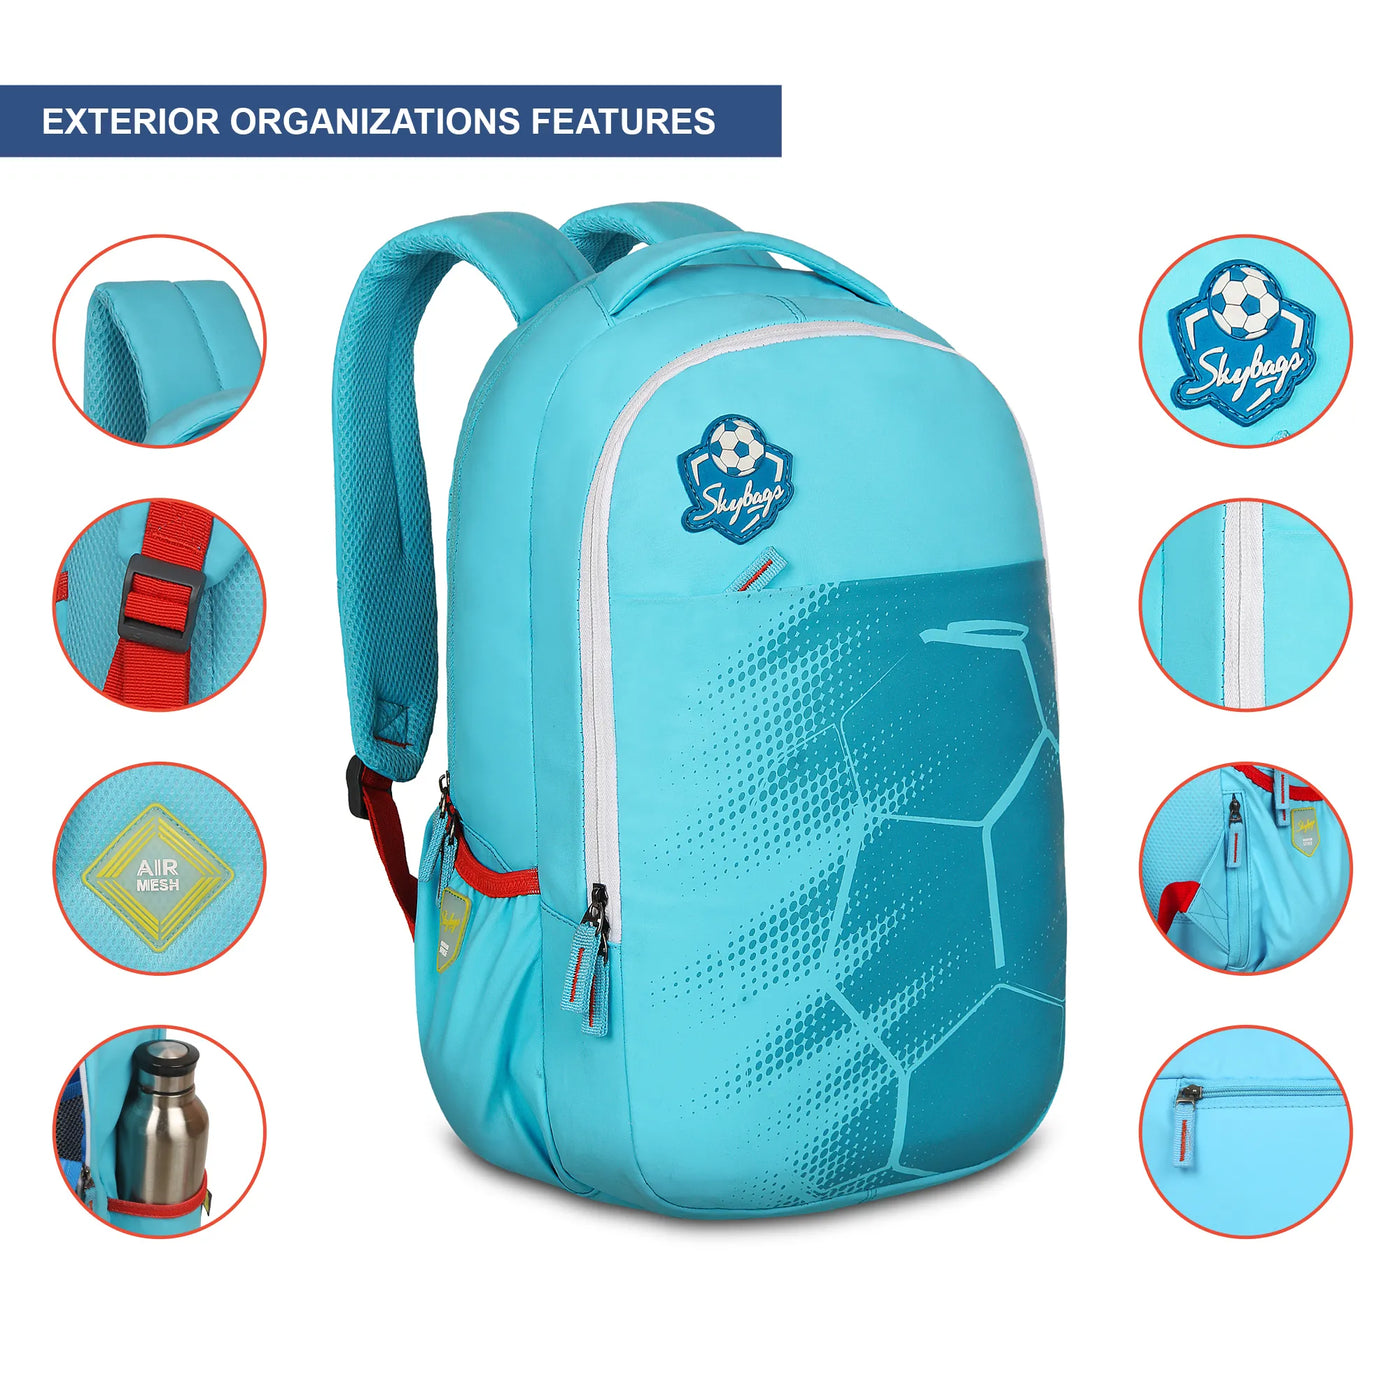 Buy Skybags 30 Ltrs Red Medium Backpack Online At Best Price @ Tata CLiQ